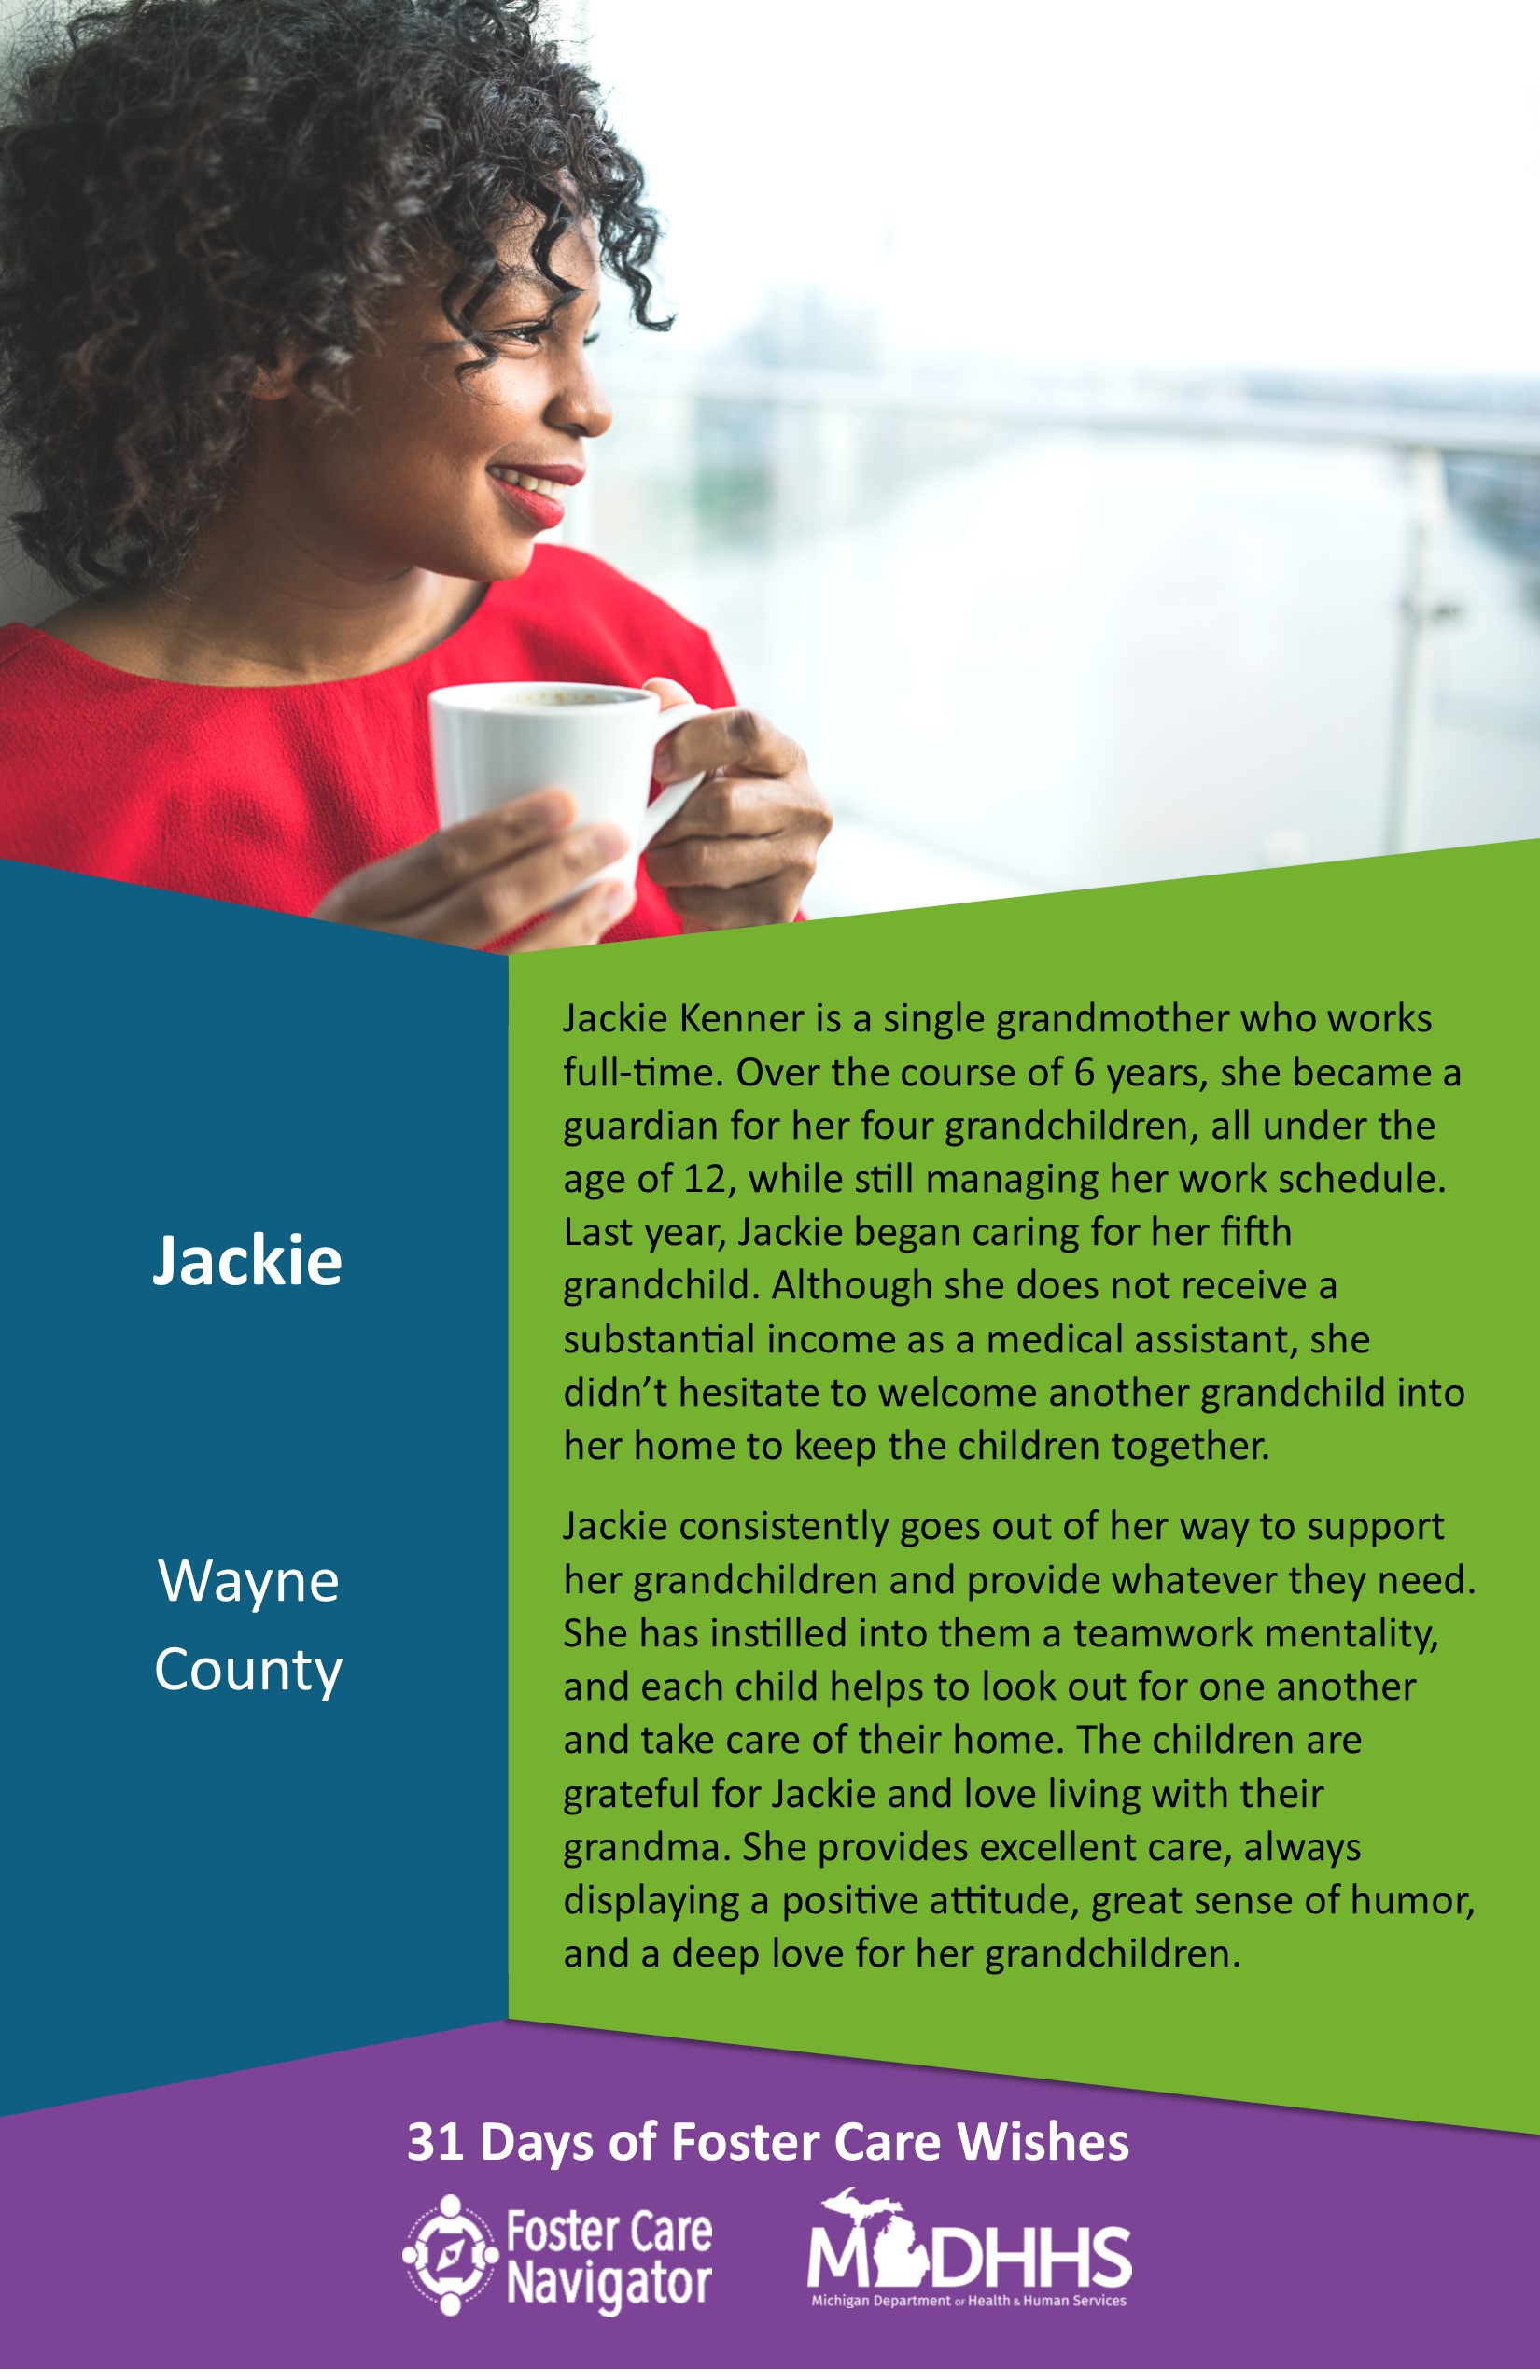 This full page feature includes all of the text listed in the body of this blog post as well as a photo of Jackie. The background is blue on the left, green on the right, and purple at the bottom of the page where the logos are located.